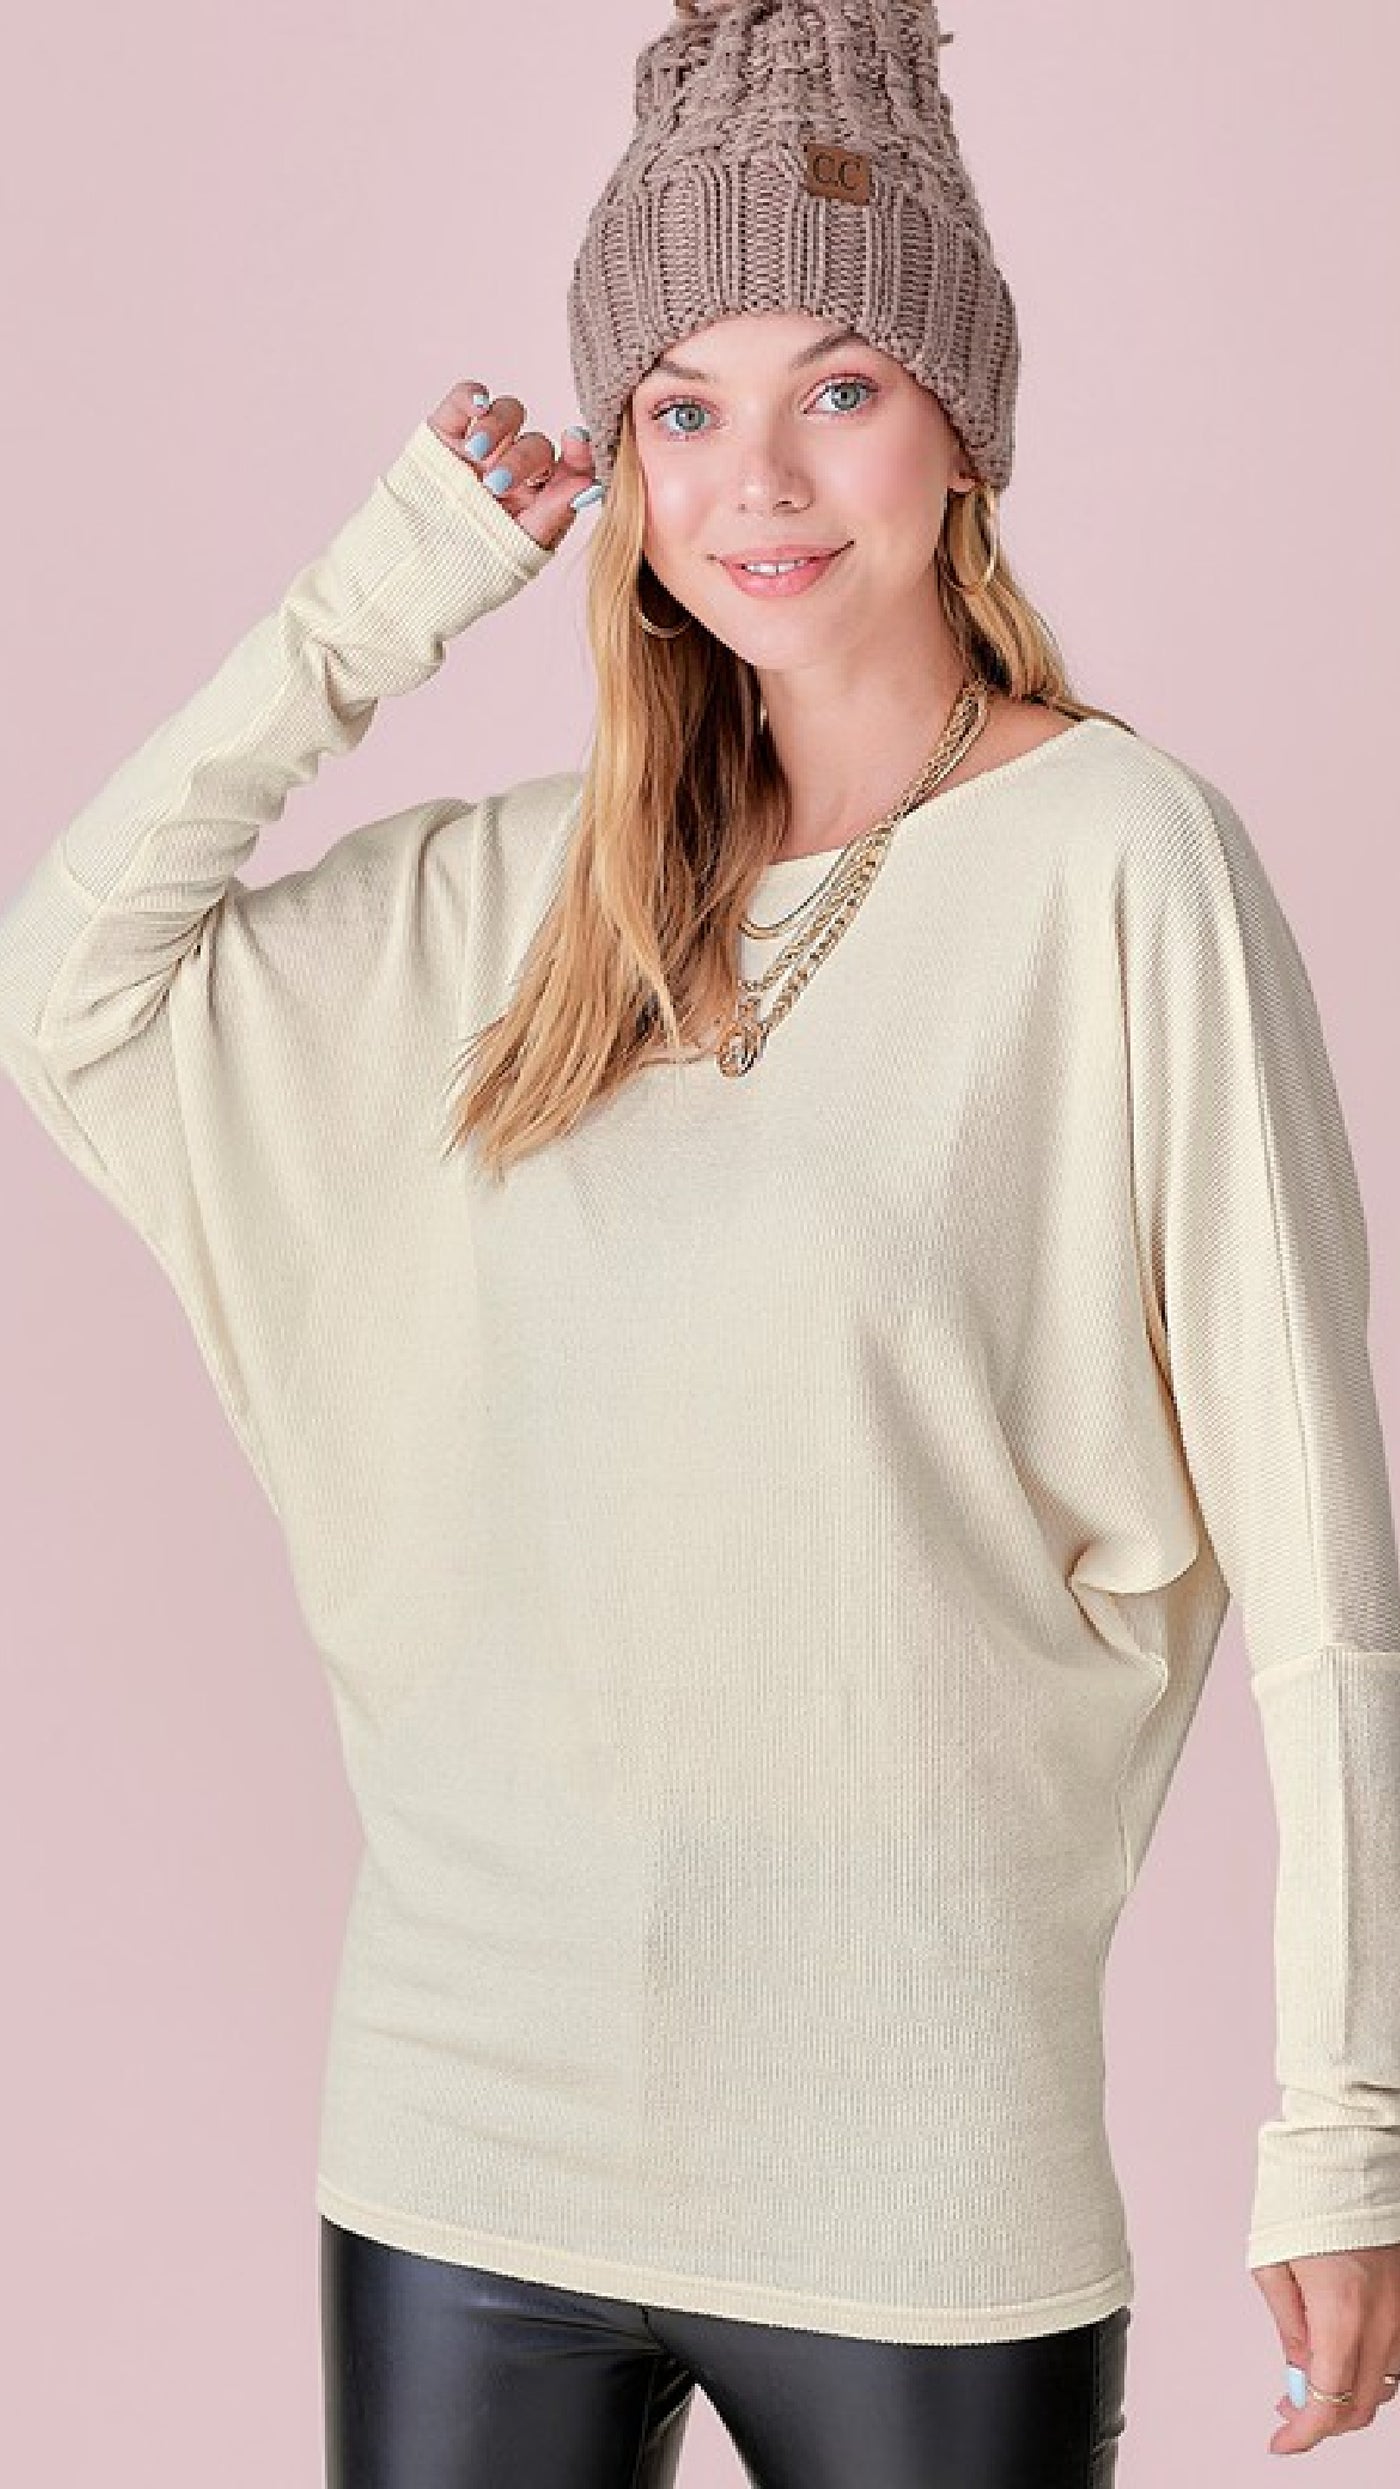 You Know Me Top - Cream - Piper and Hollow Boutique